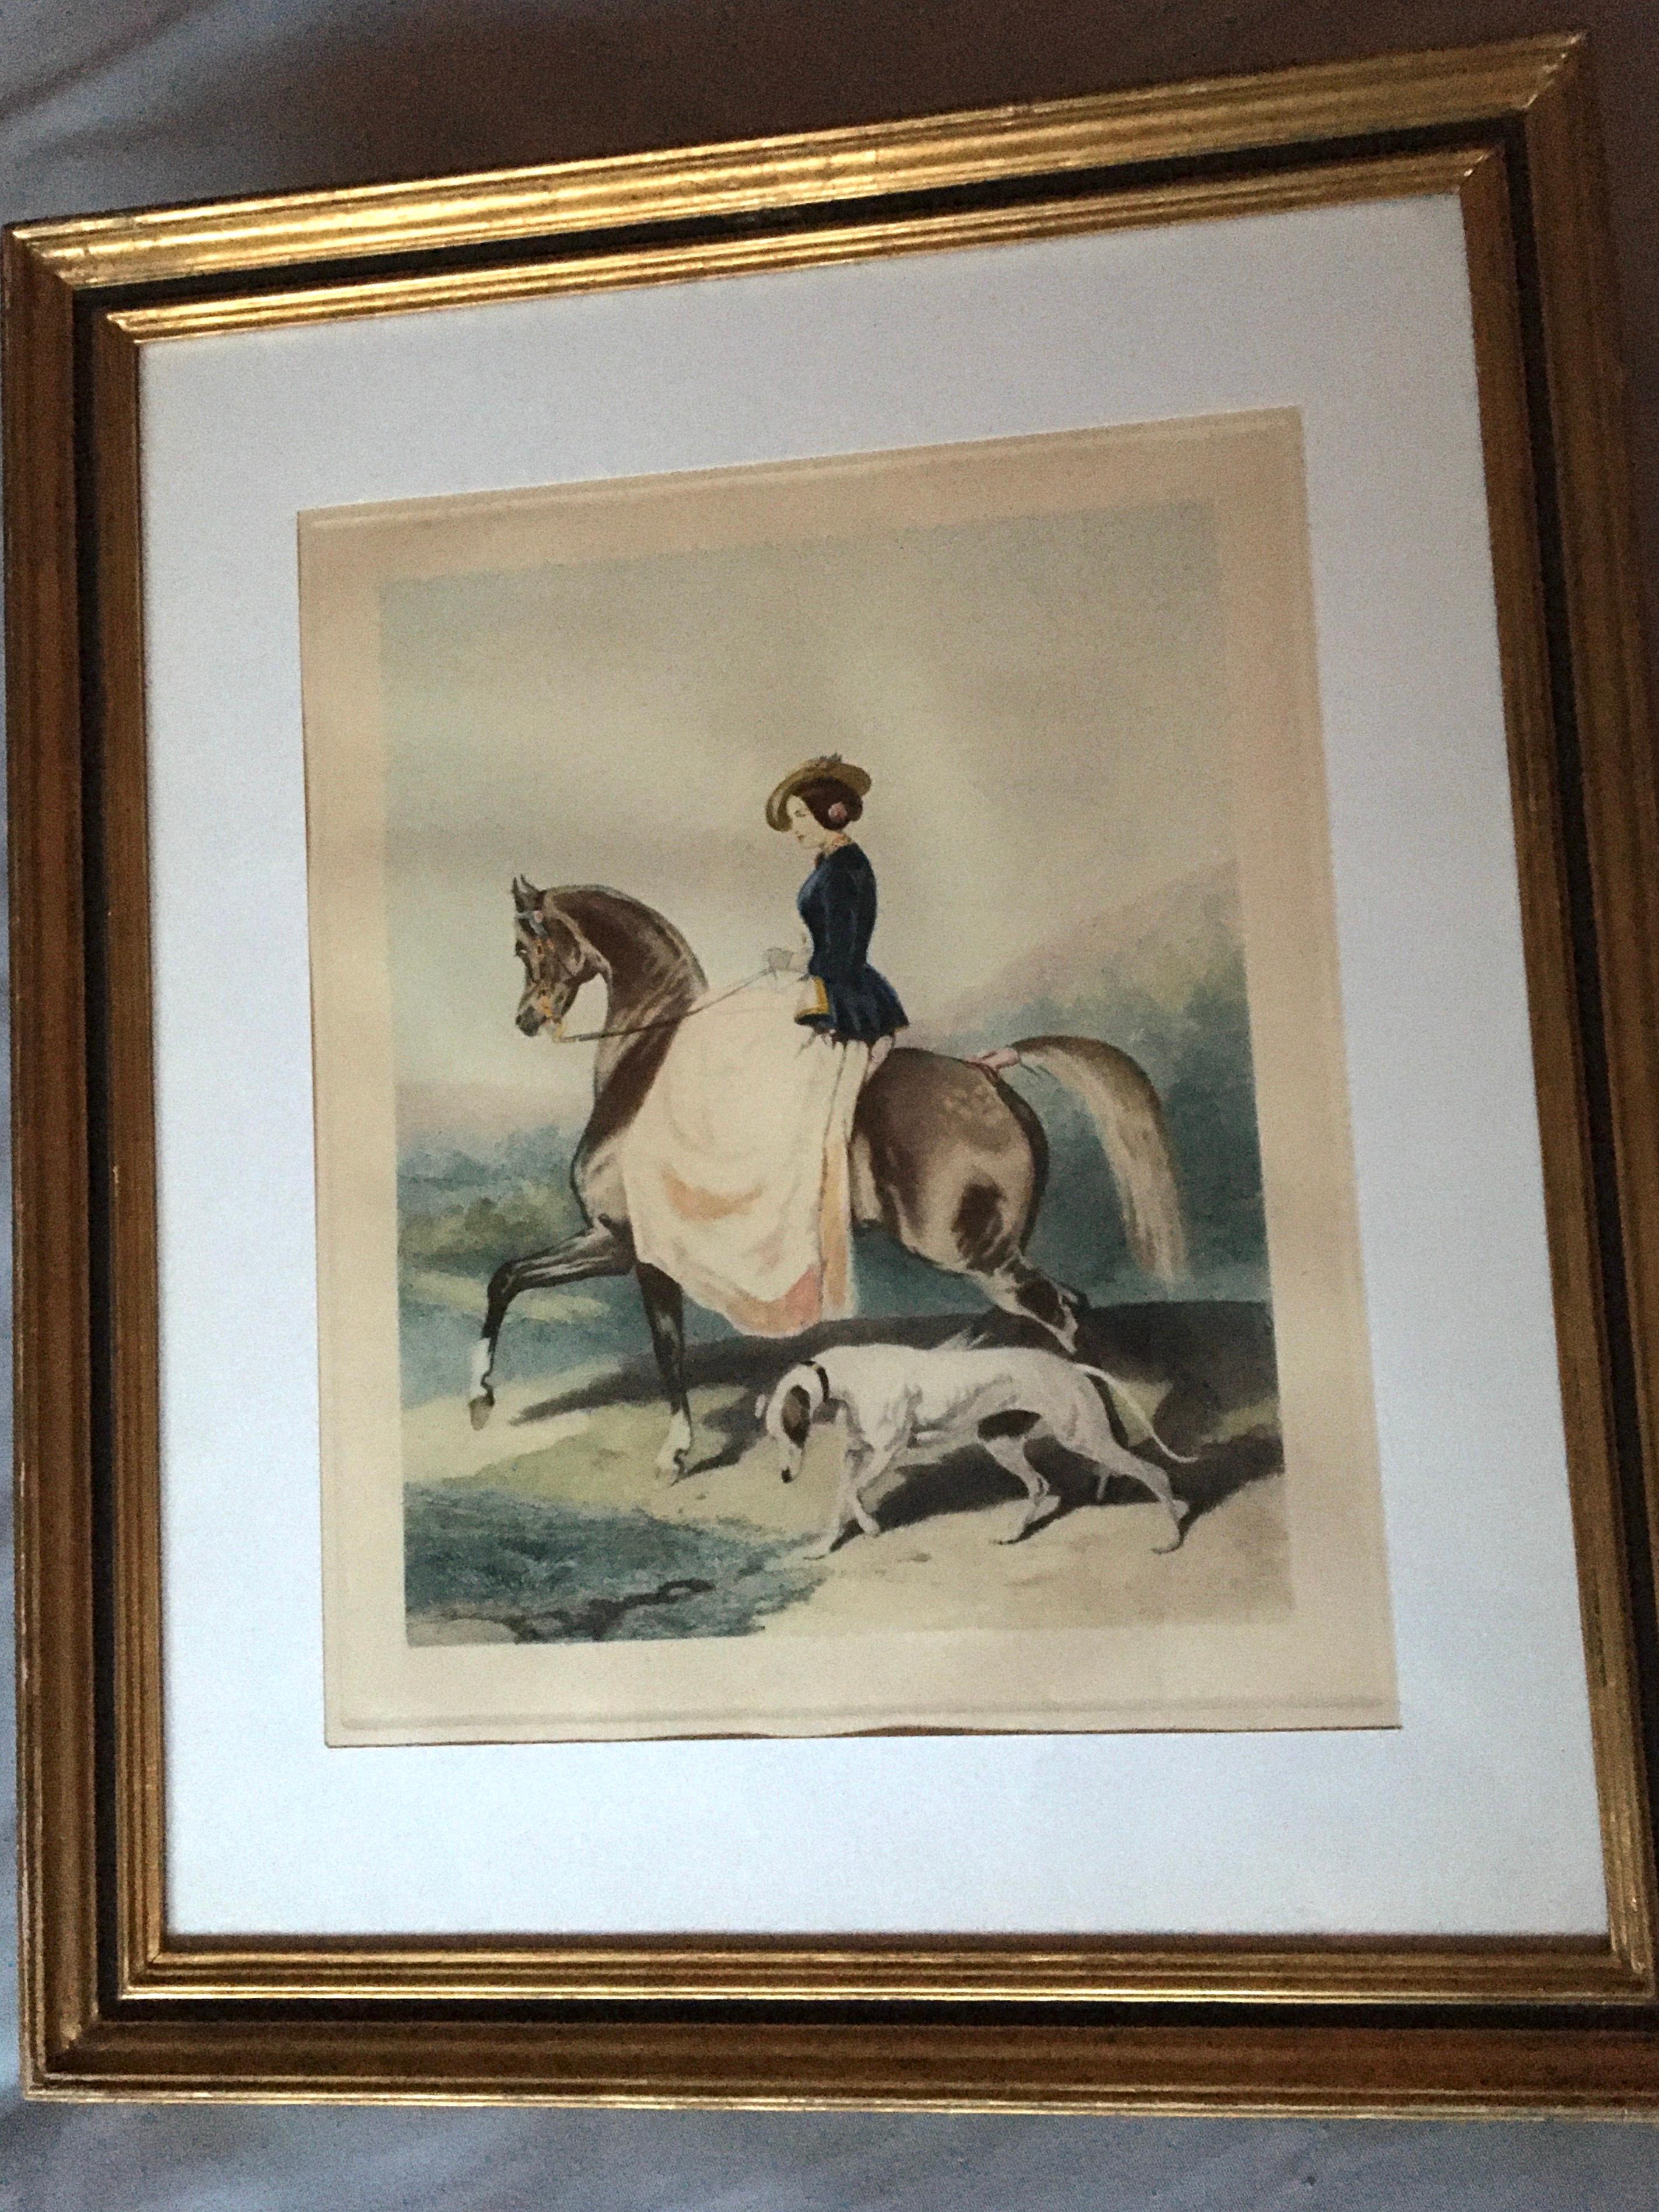 Charming color engraving print  from the 19th century representing a young horse rider on a walk accompanied by her greyhound.
The engraving is taken from a painting made by Alfred de Dreux, ( 1810-1860 ) a French Portrait and animal painter in the